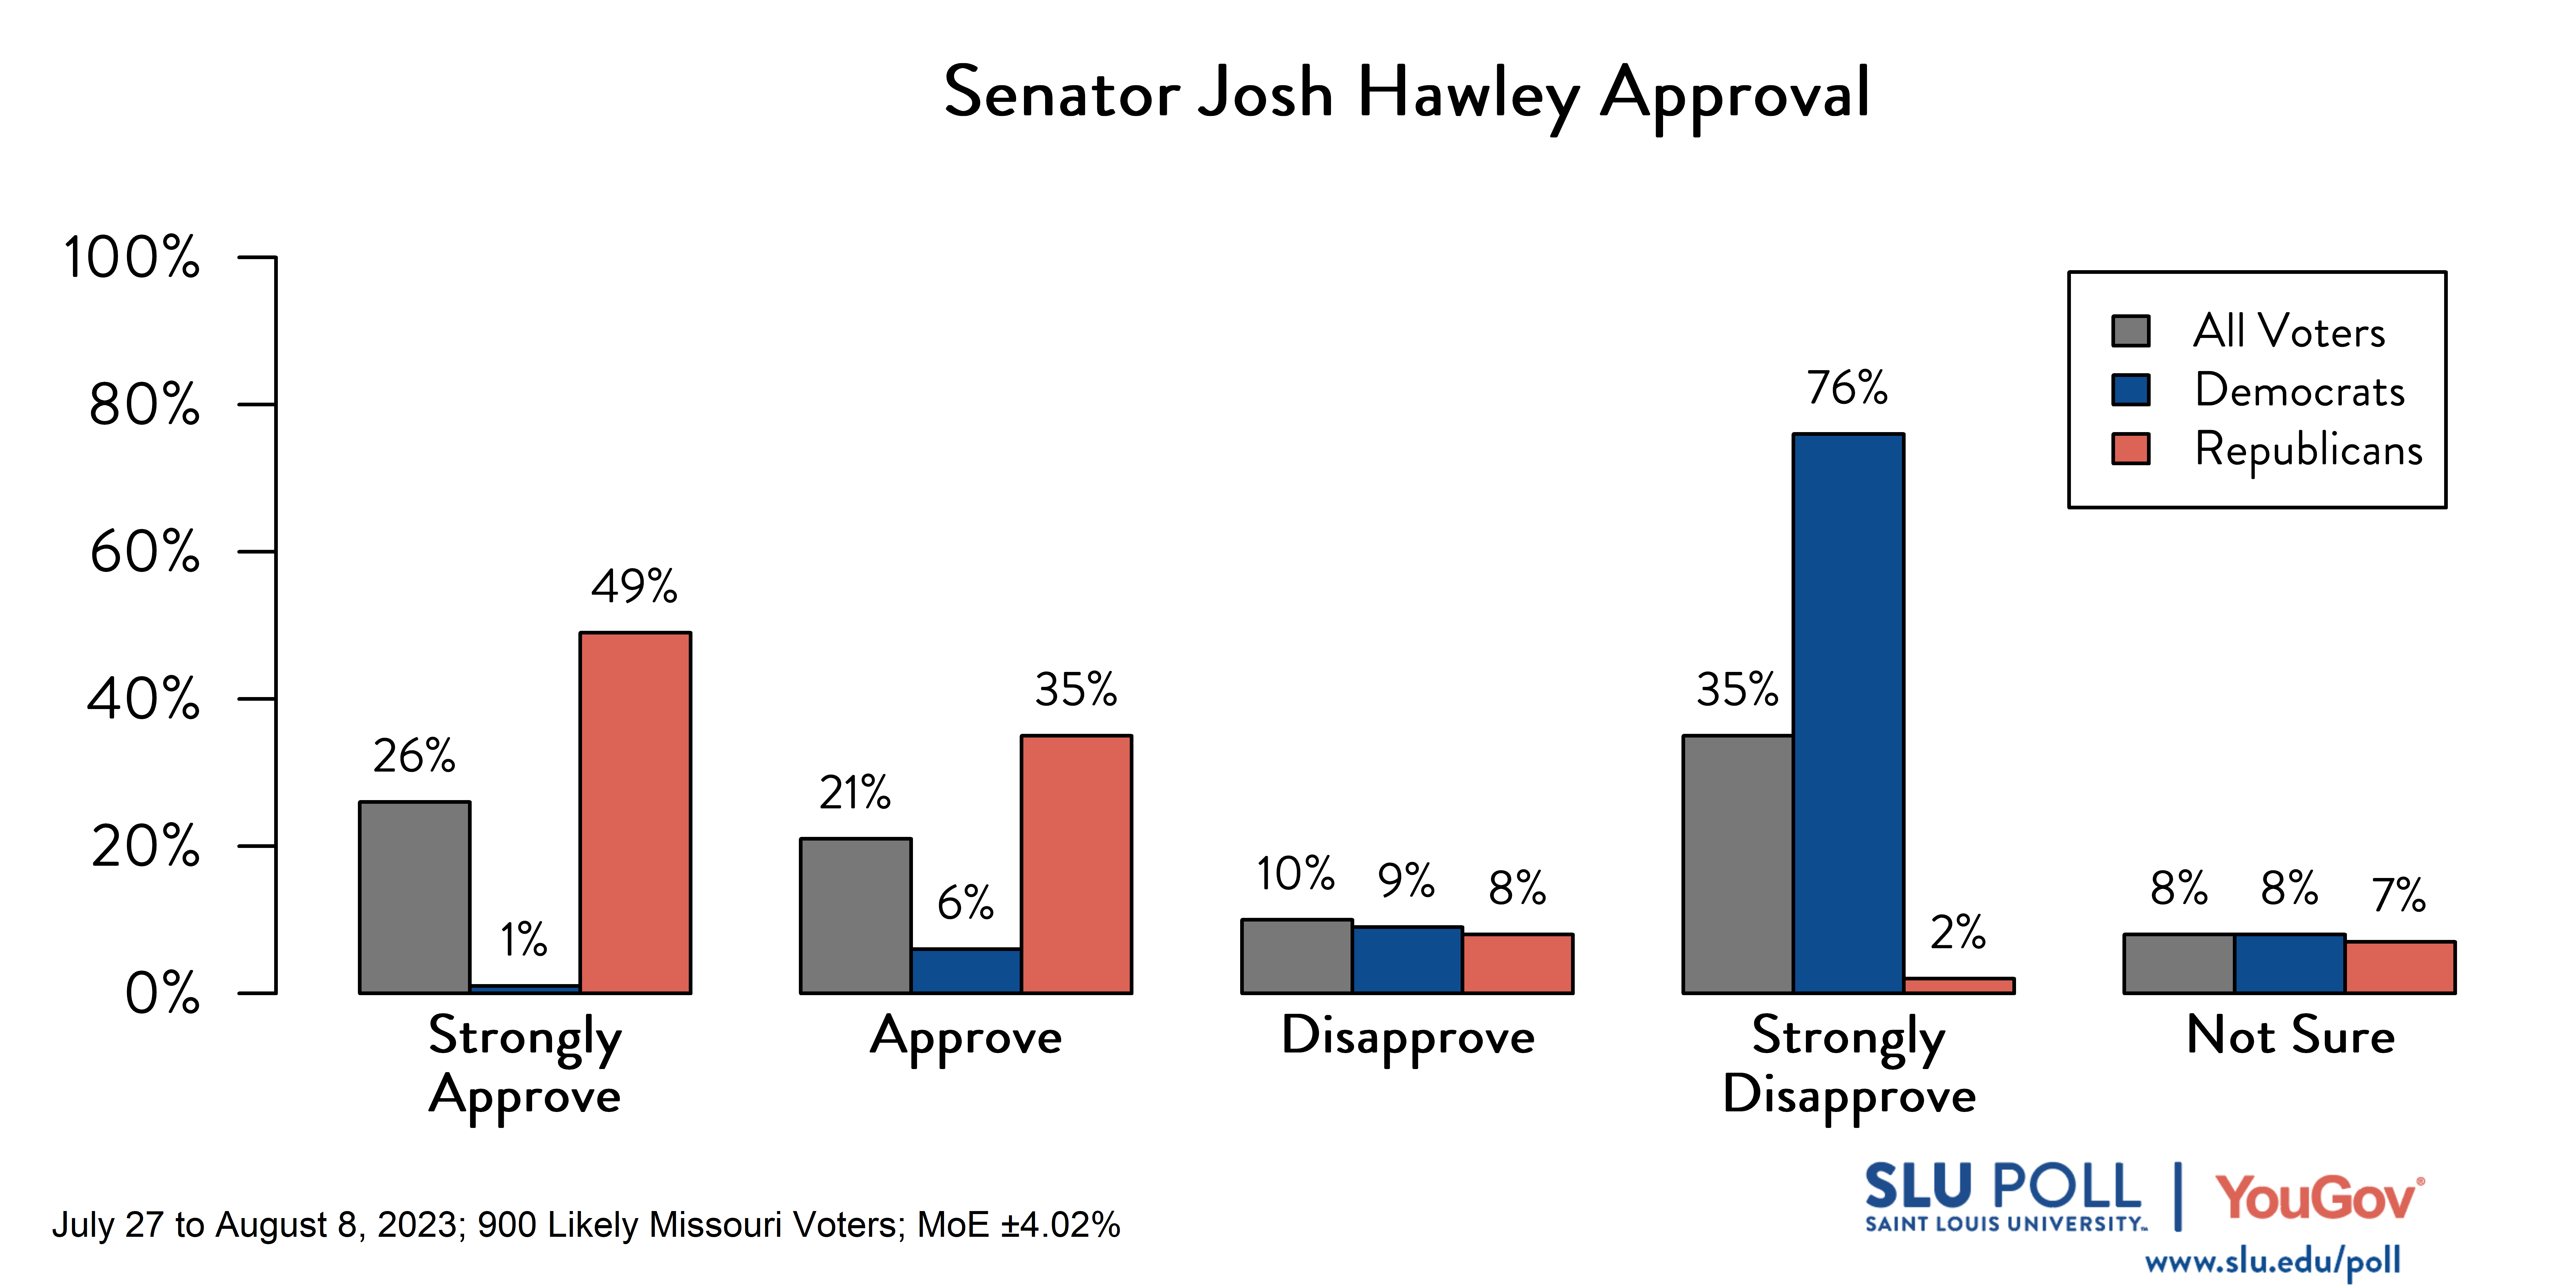 Likely voters' responses to 'Do you approve or disapprove of the way each is doing their job: Senator Josh Hawley?': 26% Strongly approve, 21% Approve, 10% Disapprove, 35% Strongly disapprove, and 8% Not sure. Democratic voters' responses: ' 1% Strongly approve, 6% Approve, 9% Disapprove, 76% Strongly disapprove, and 8% Not sure. Republican voters' responses: 49% Strongly approve, 35% Approve, 8% Disapprove, 2% Strongly disapprove, and 7% Not sure.